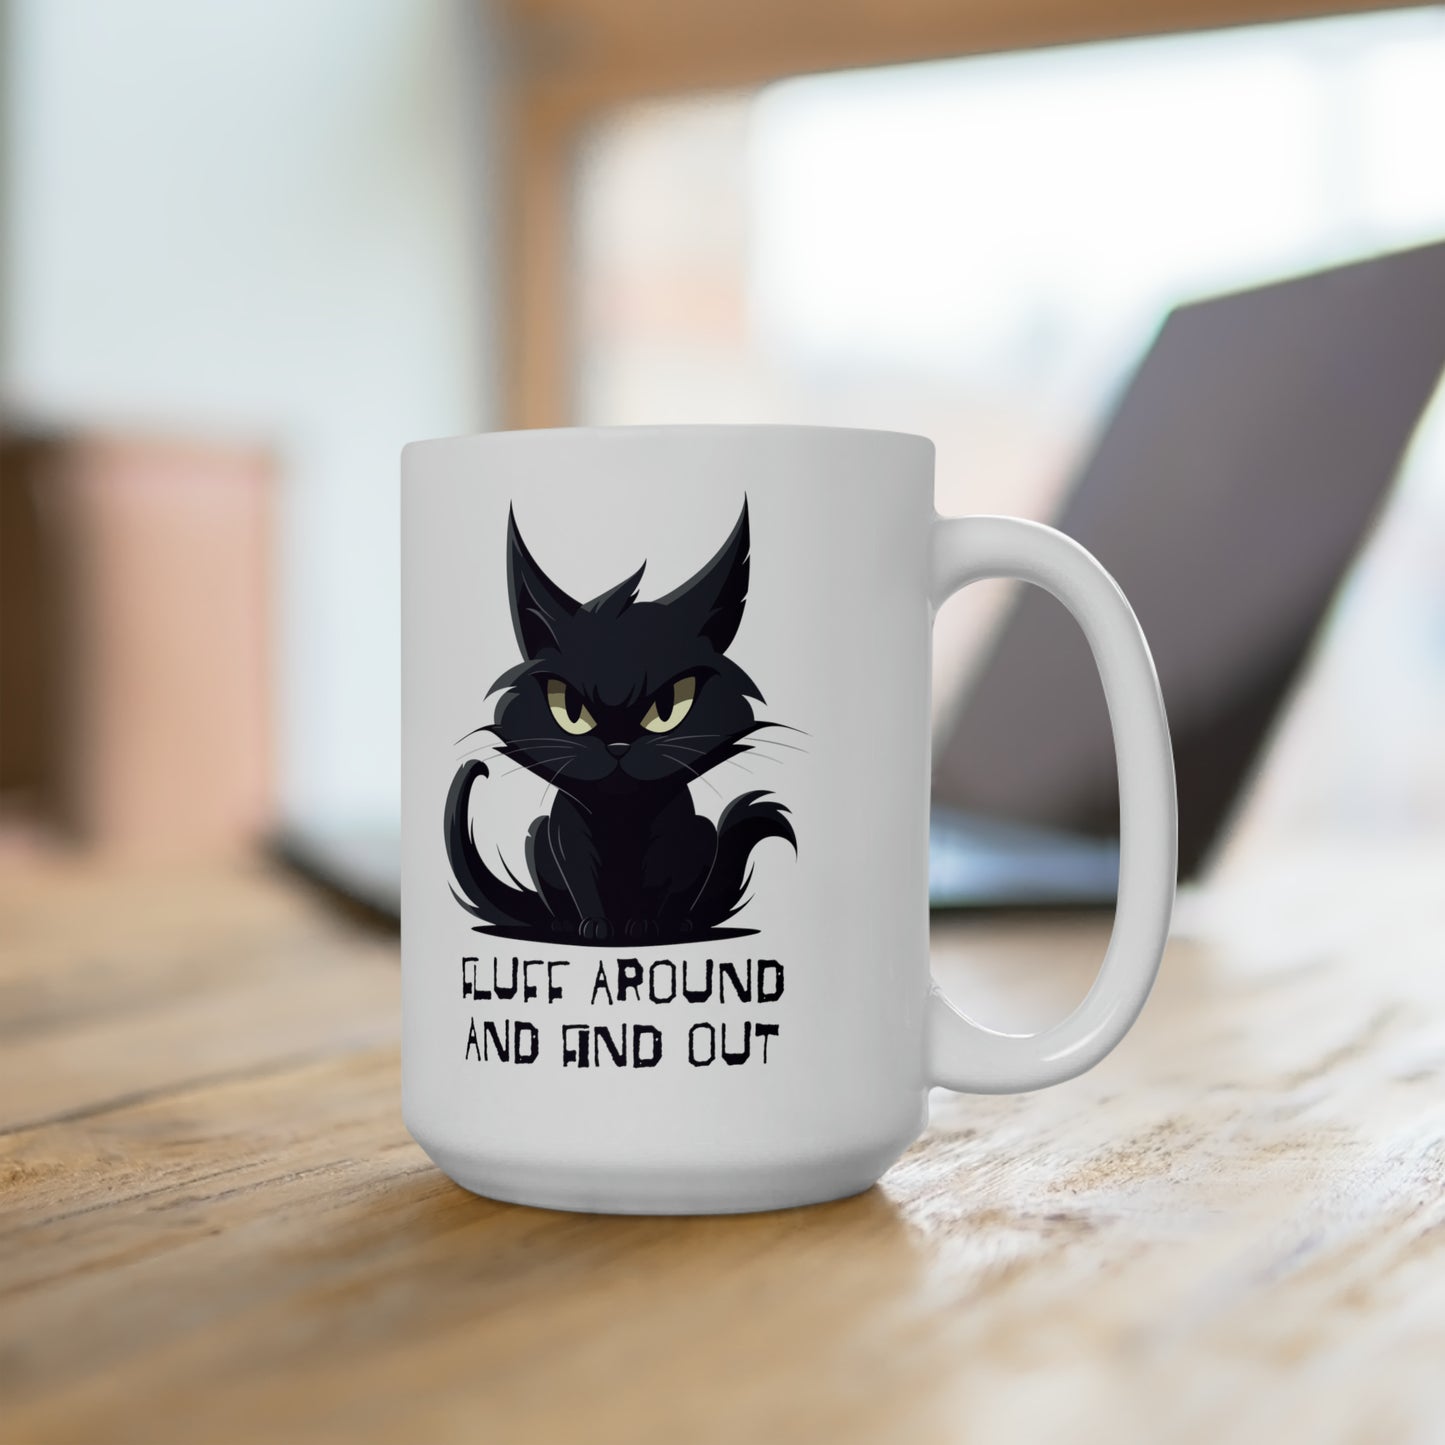 Funny Cat Coffee Mug For Fluff Around Hot Tea Cup For Sarcastic Humor Cat Lovers Gift